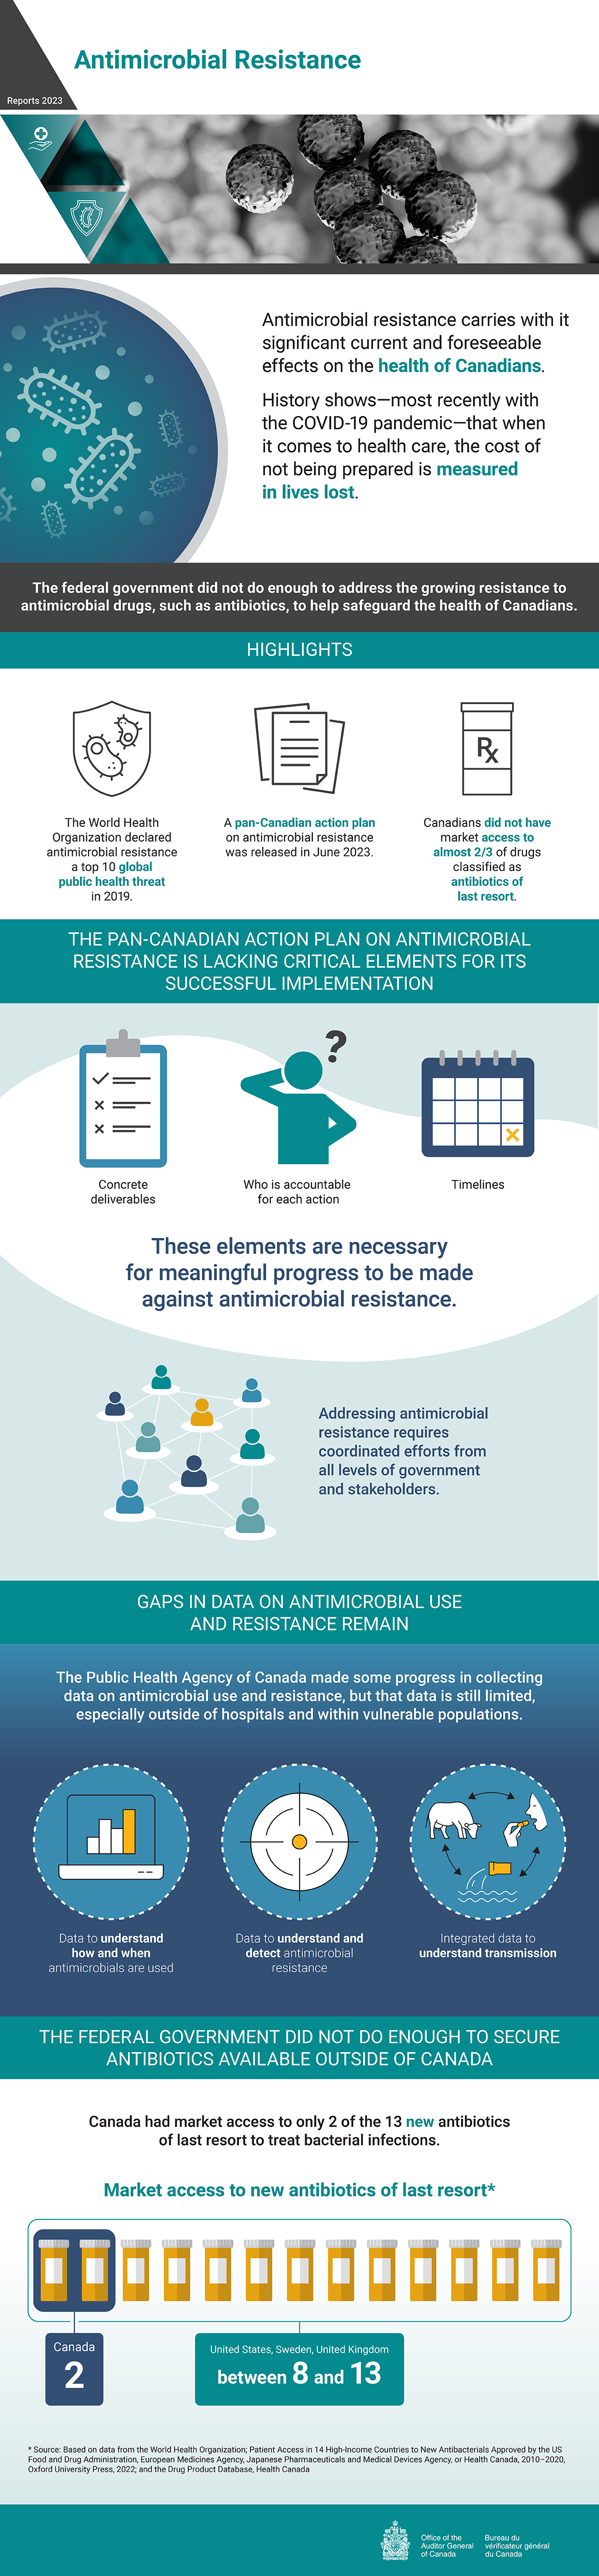 Infographic about the 2023 audit report on antimicrobial resistance